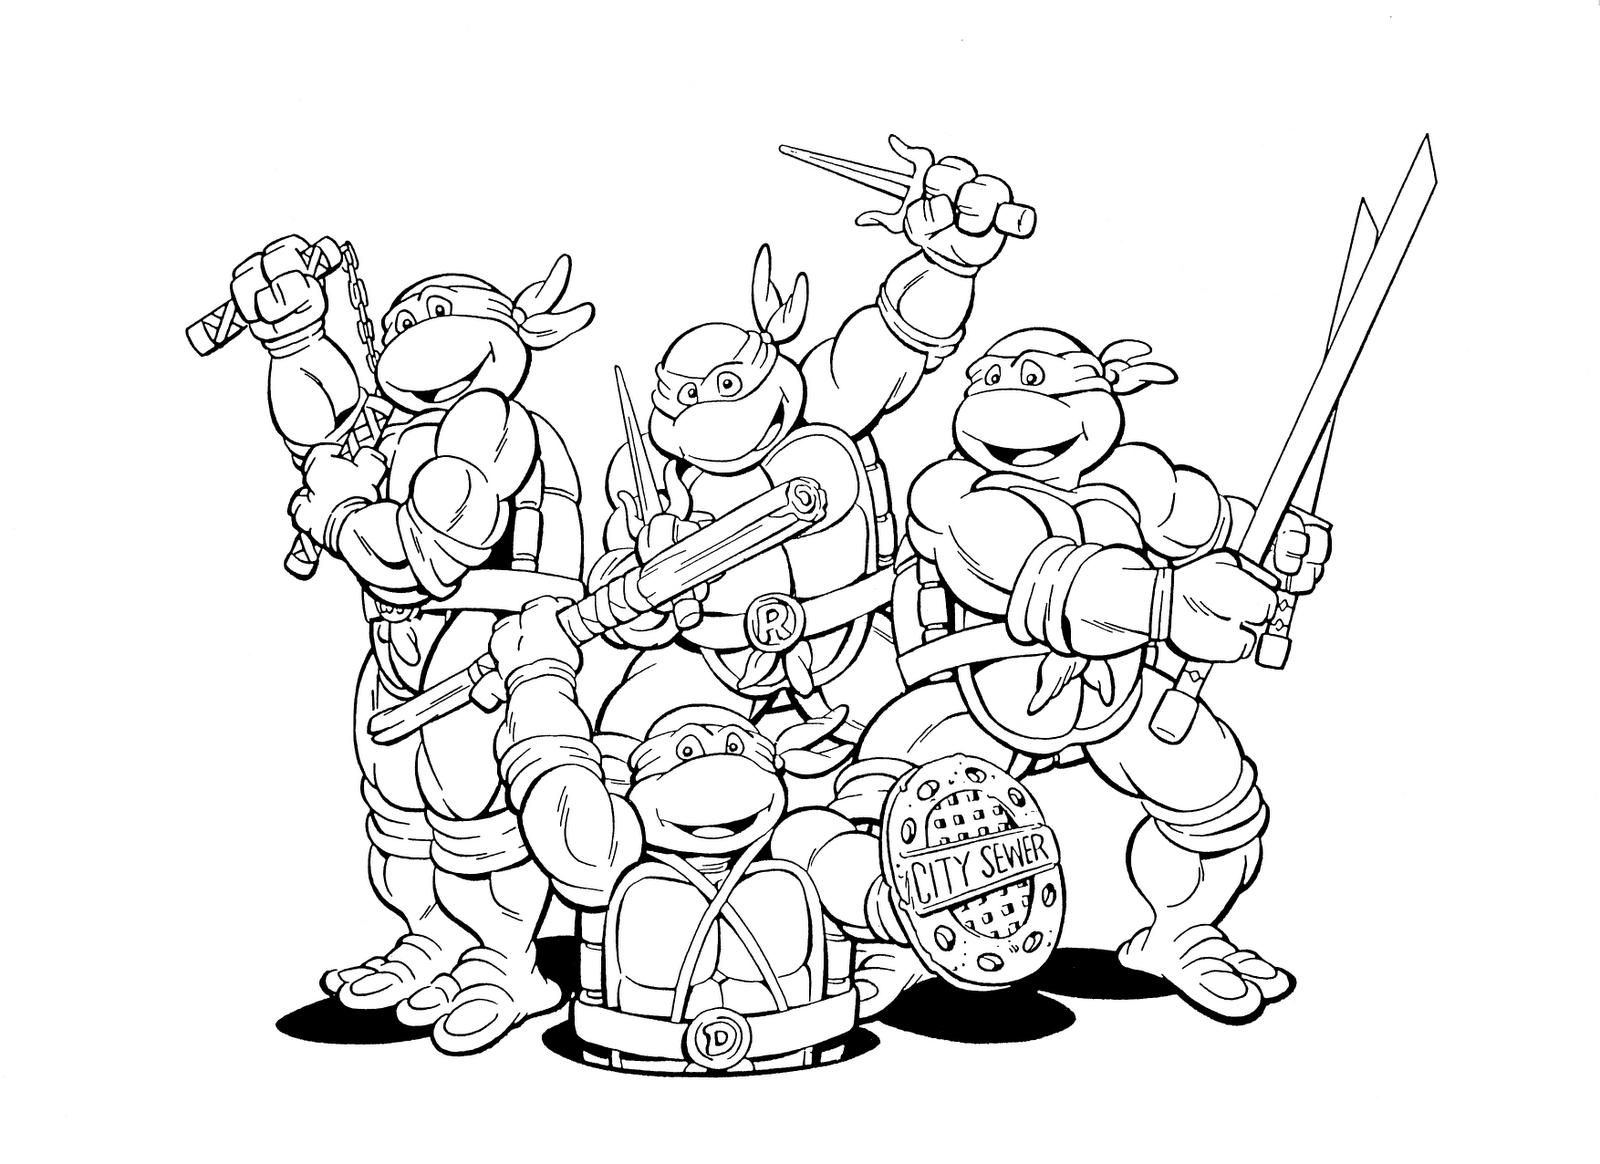 Ninja Turtle Mask Coloring Page Coloring Ideas Teenage Mutant Ninja Turtles Coloring Pages Free